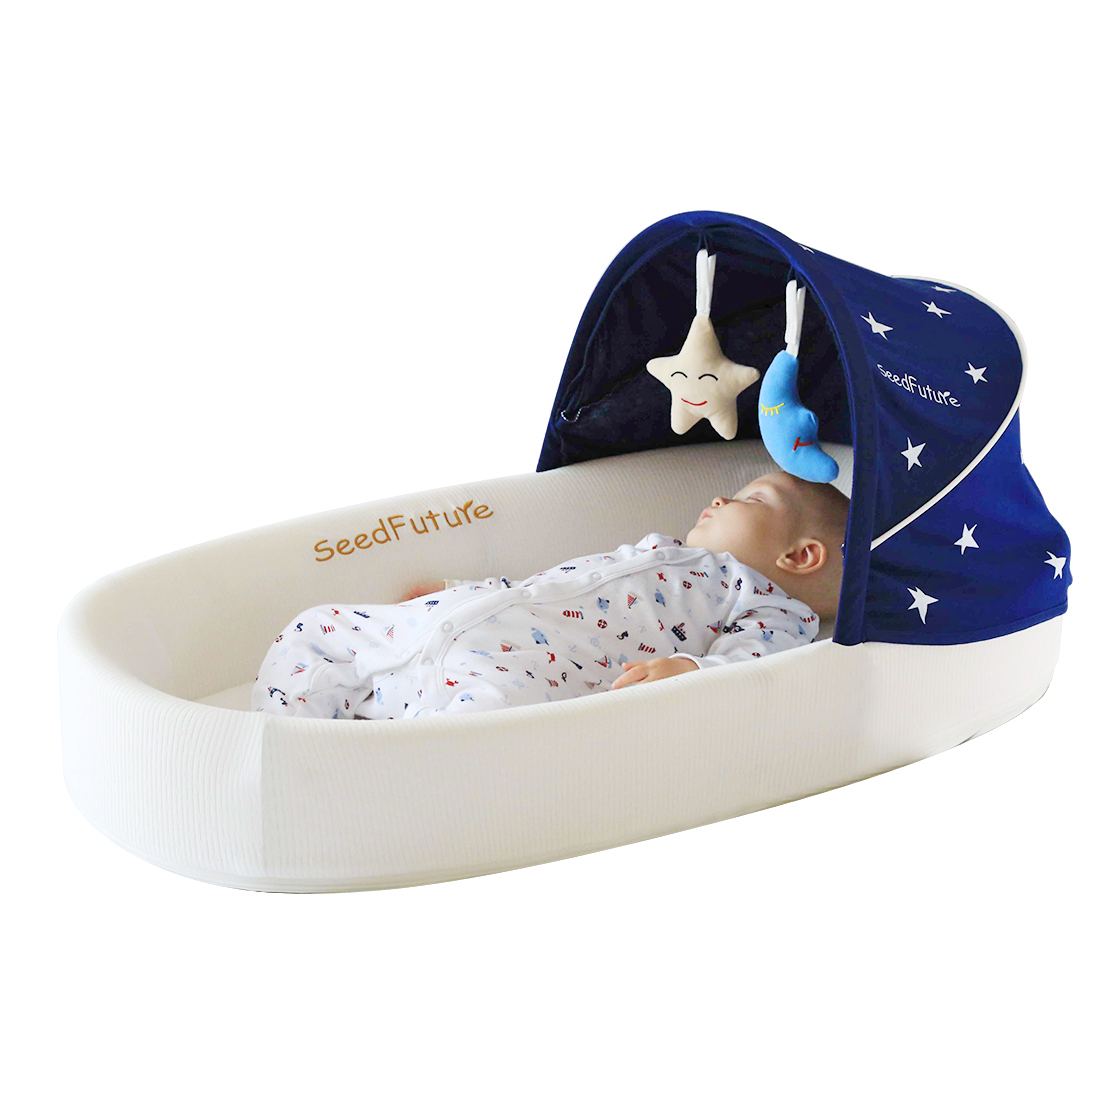 portable infant sleeper bed